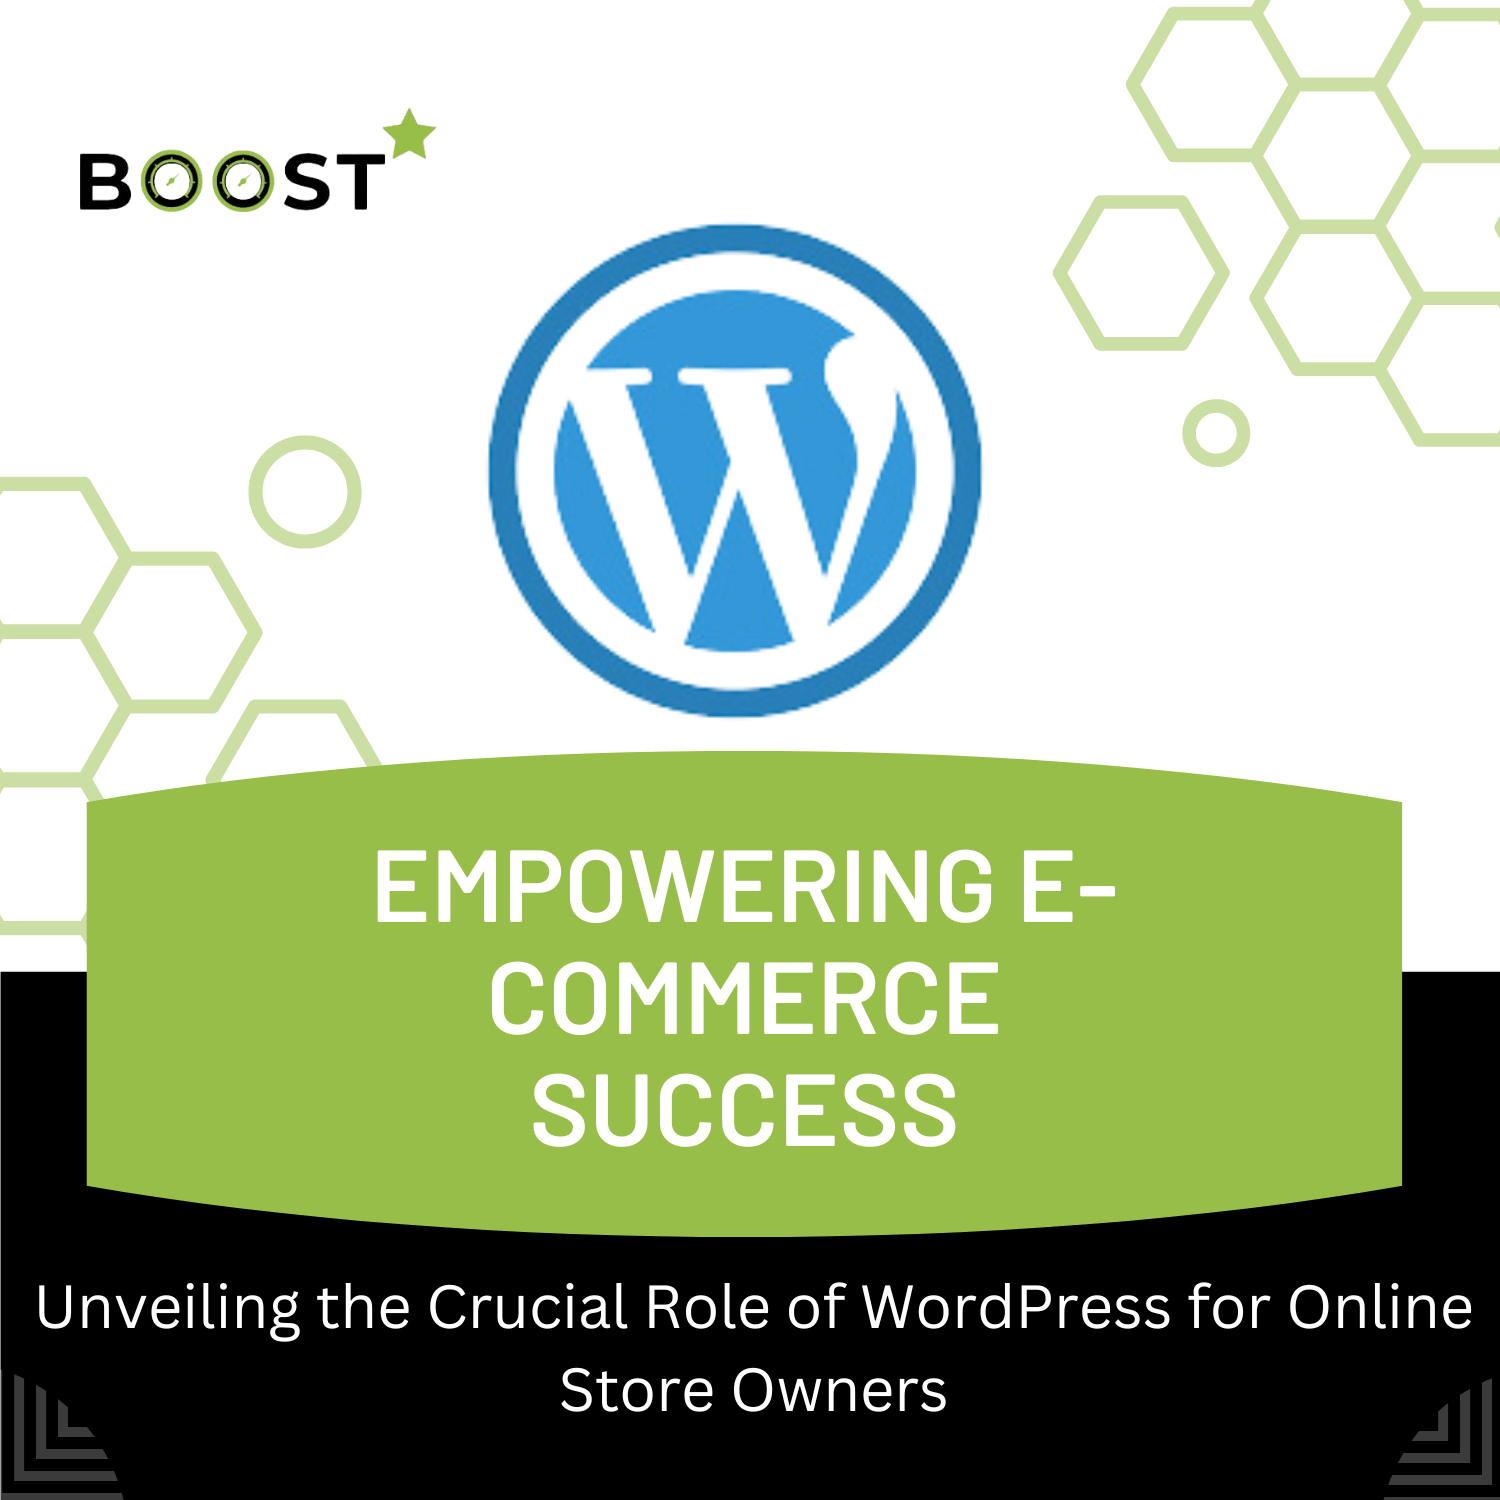 Empowering E-Commerce Success: Unveiling the Crucial Role of WordPress for Online Store Owners